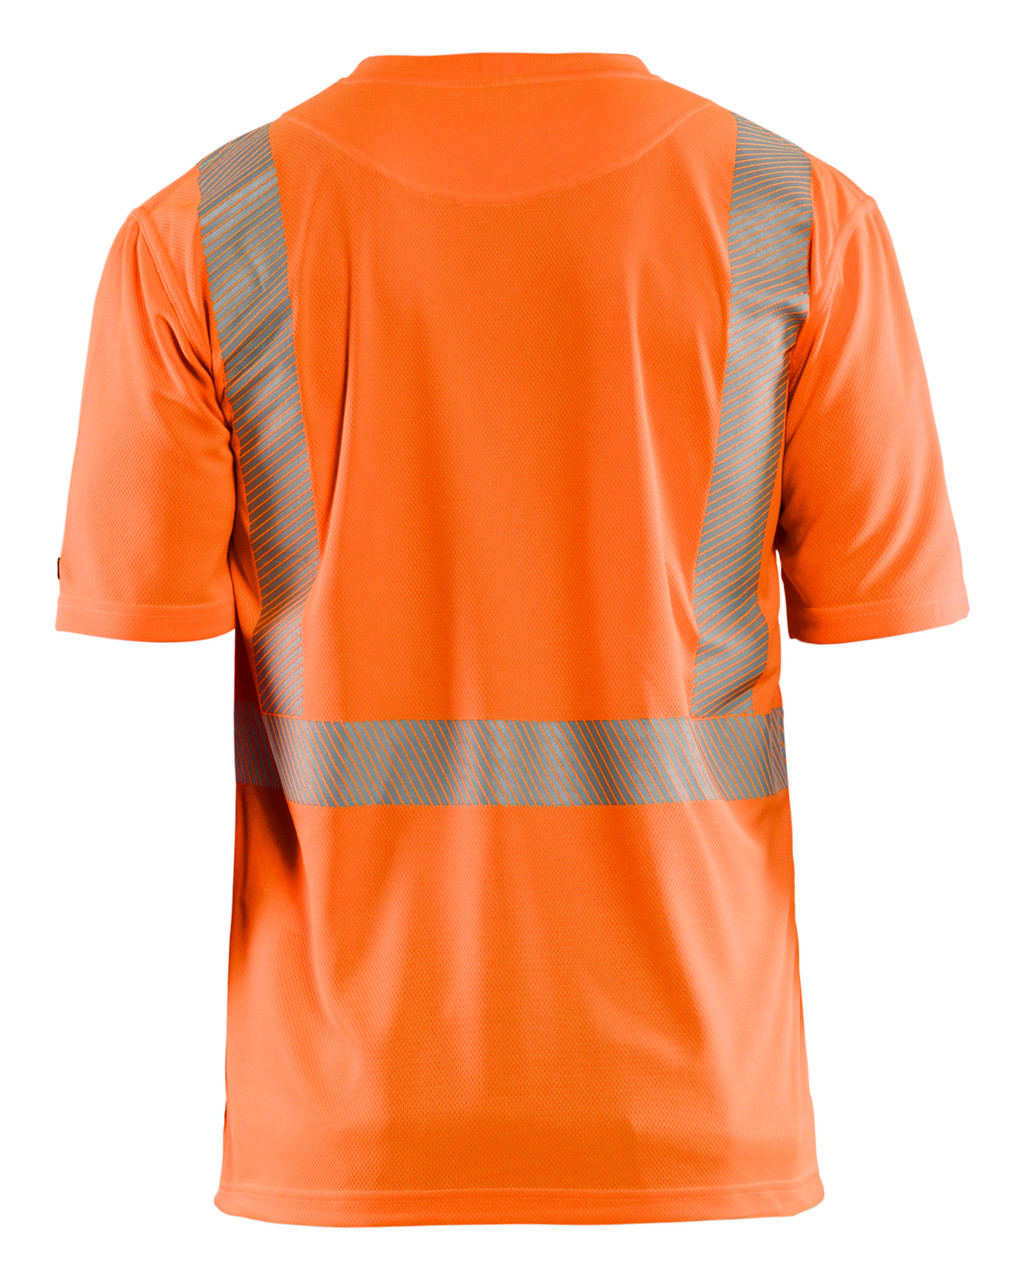 Buy online in Australia and New Zealand a  High Vis Orange T-Shirt  for Cabinet Makers that are comfortable and durable.